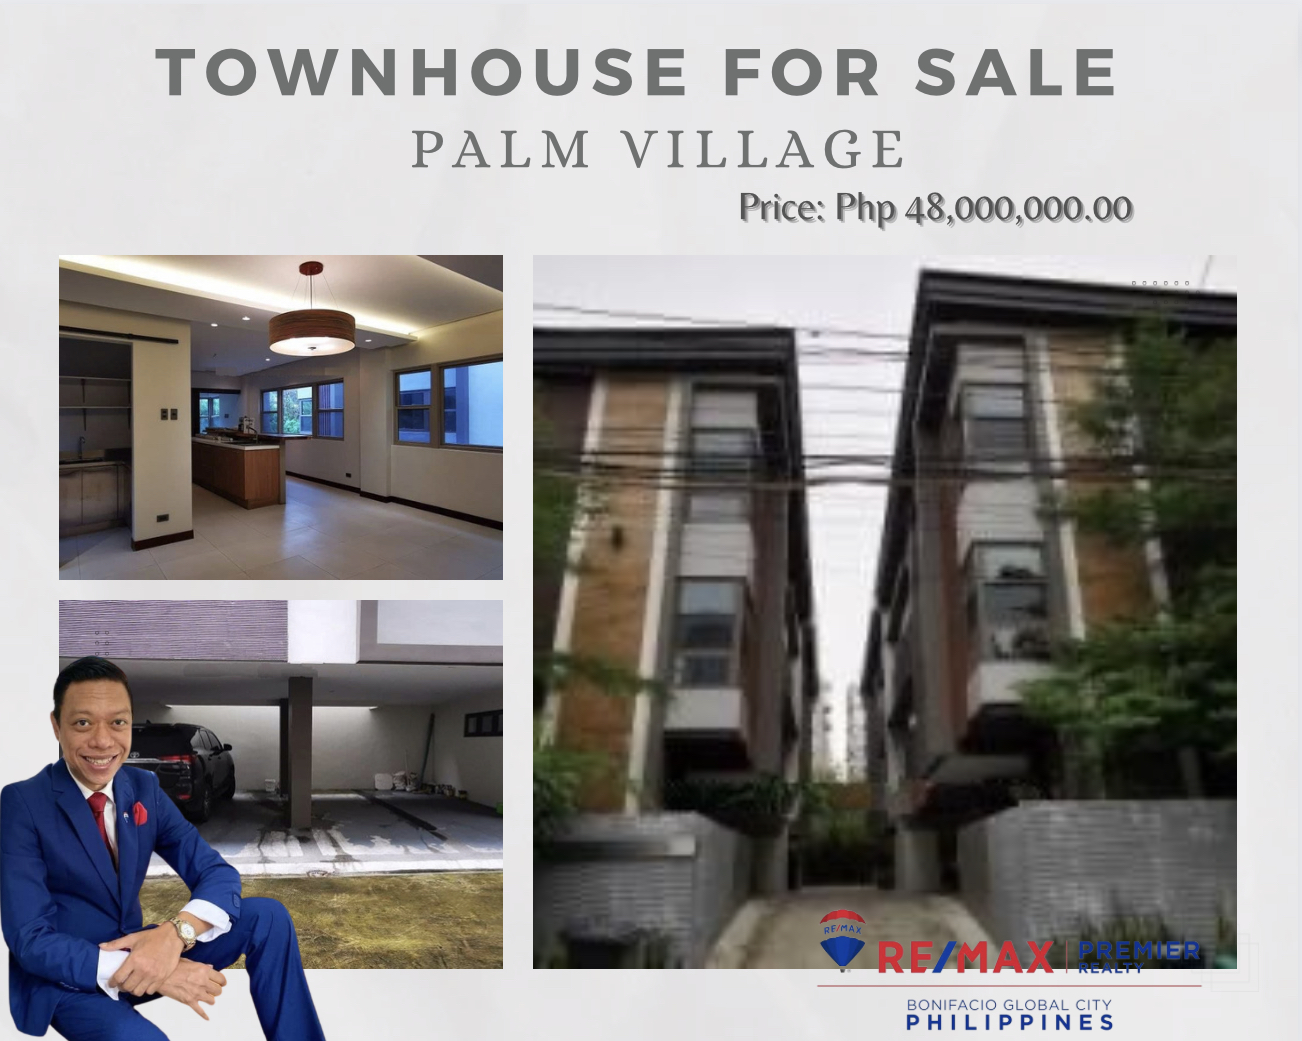 TOWNHOUSE FOR SALE in Palm Village, Makati City‼️